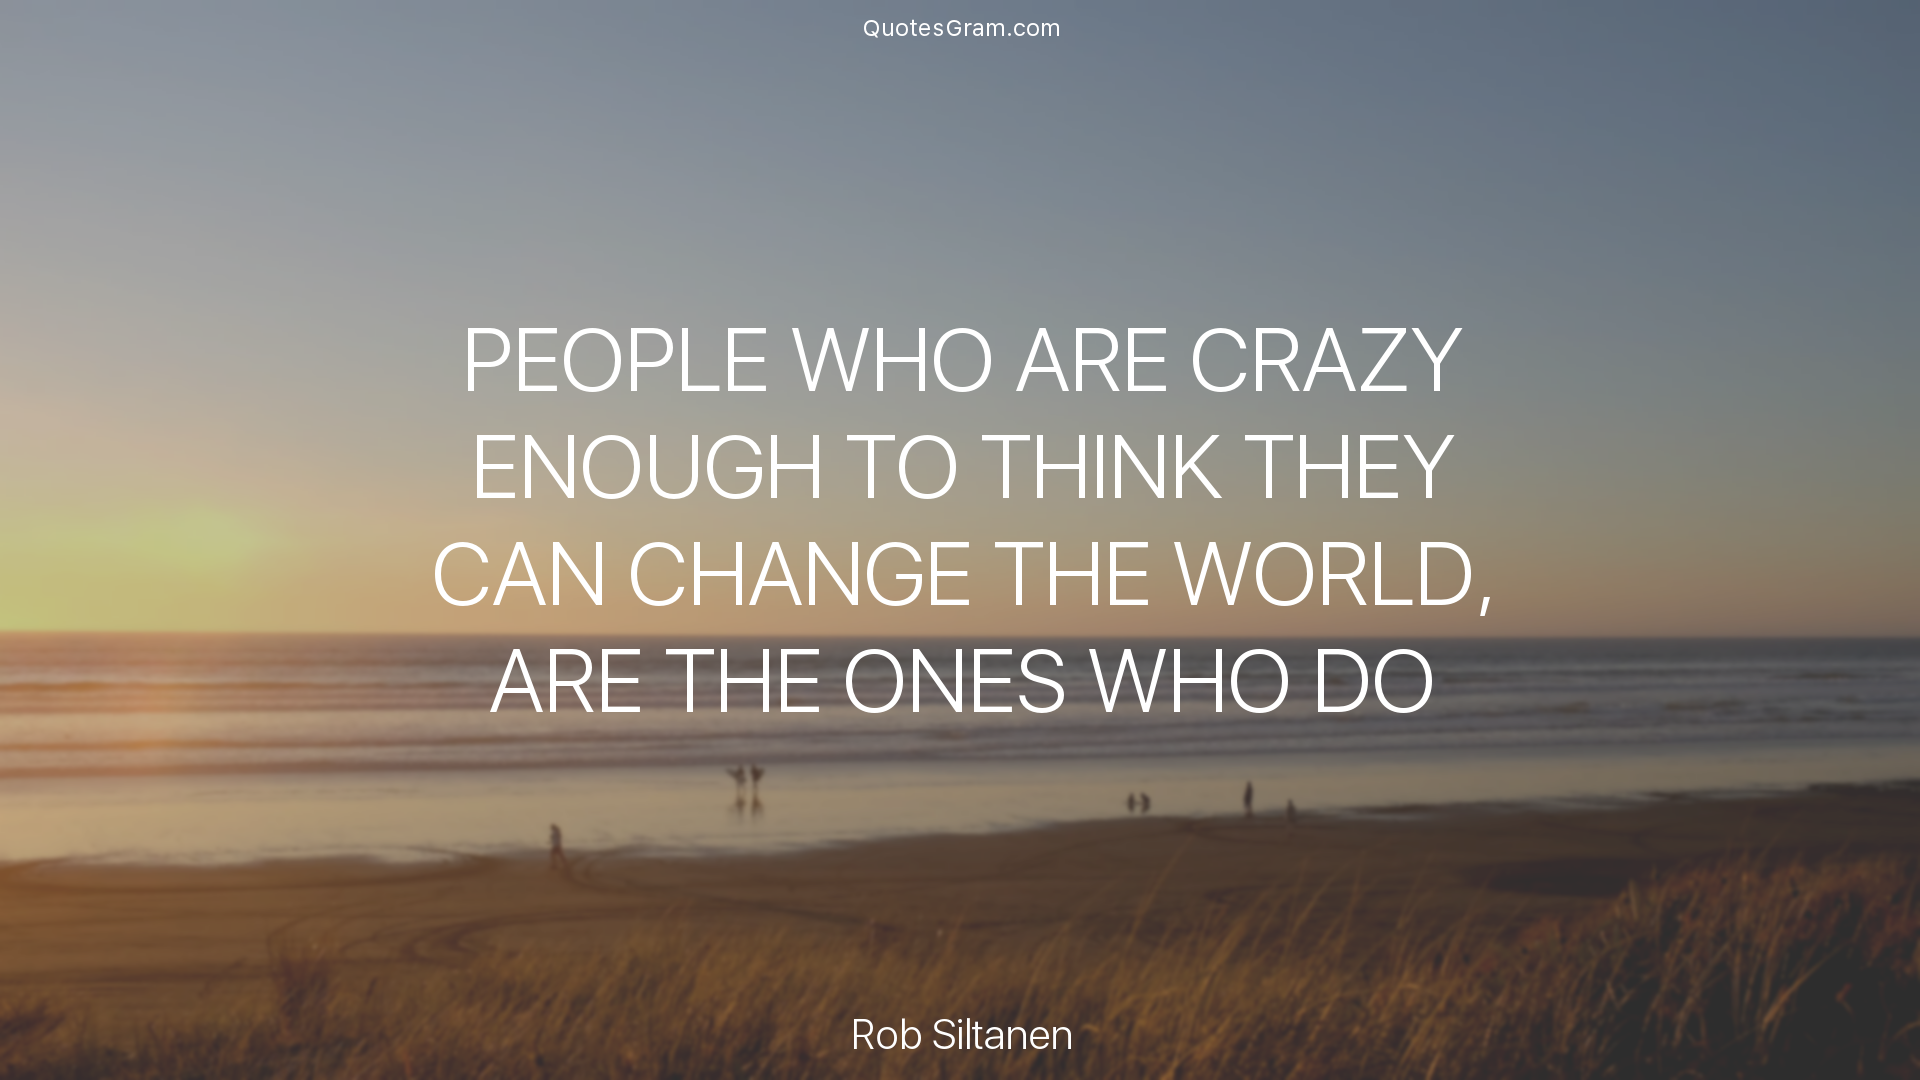 rob-siltanen-quote-people-who-are-crazy-enough-to-think-they-can.png